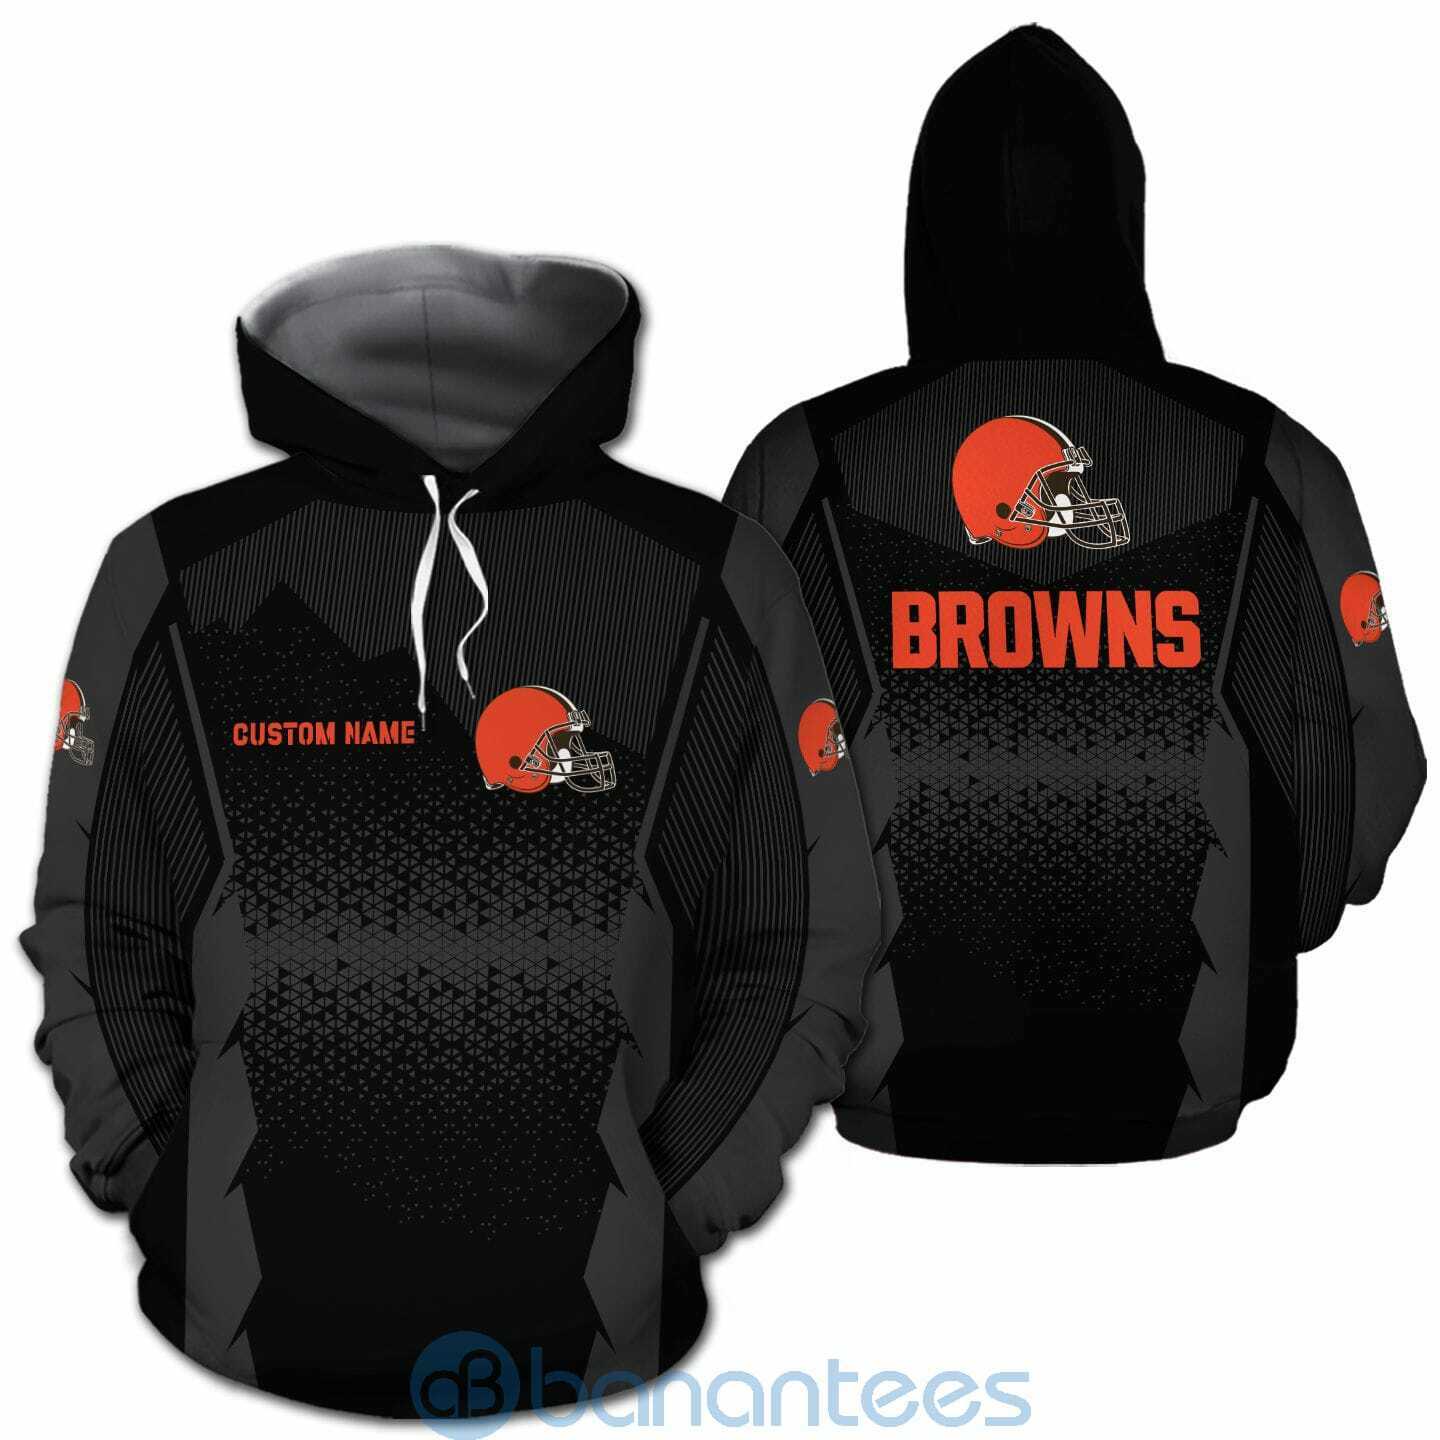 Cleveland Browns NFL Football Team Custom Name 3D All Over Printed Shirt